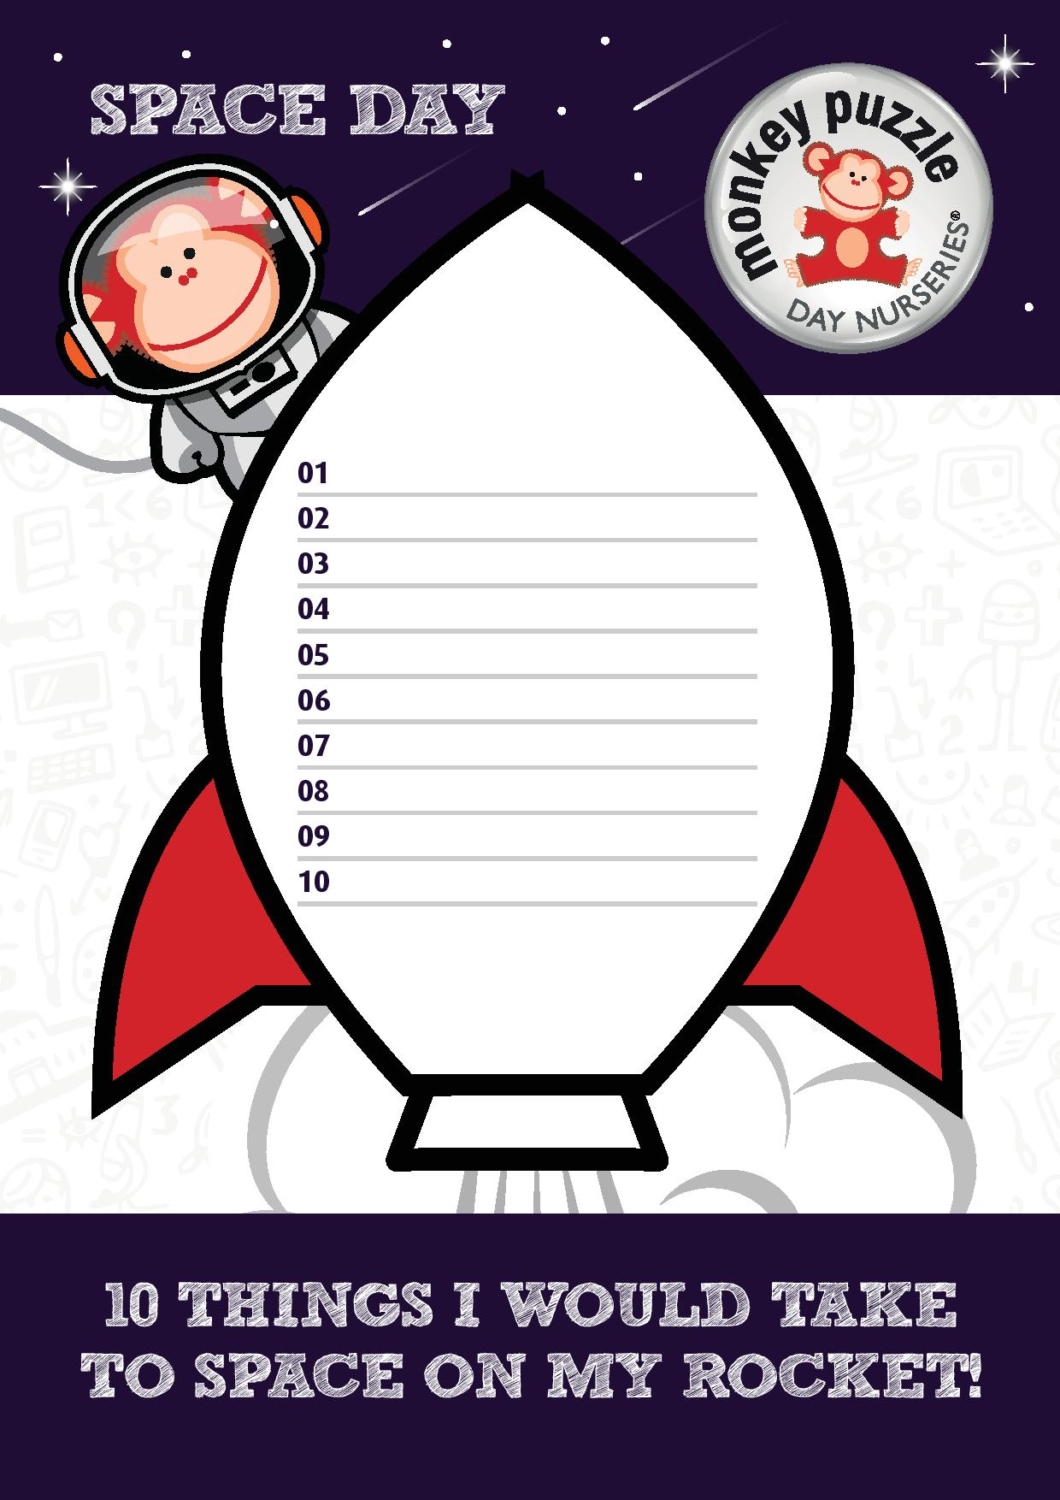 Ten things to take to Space on your Rocket Ship Activity